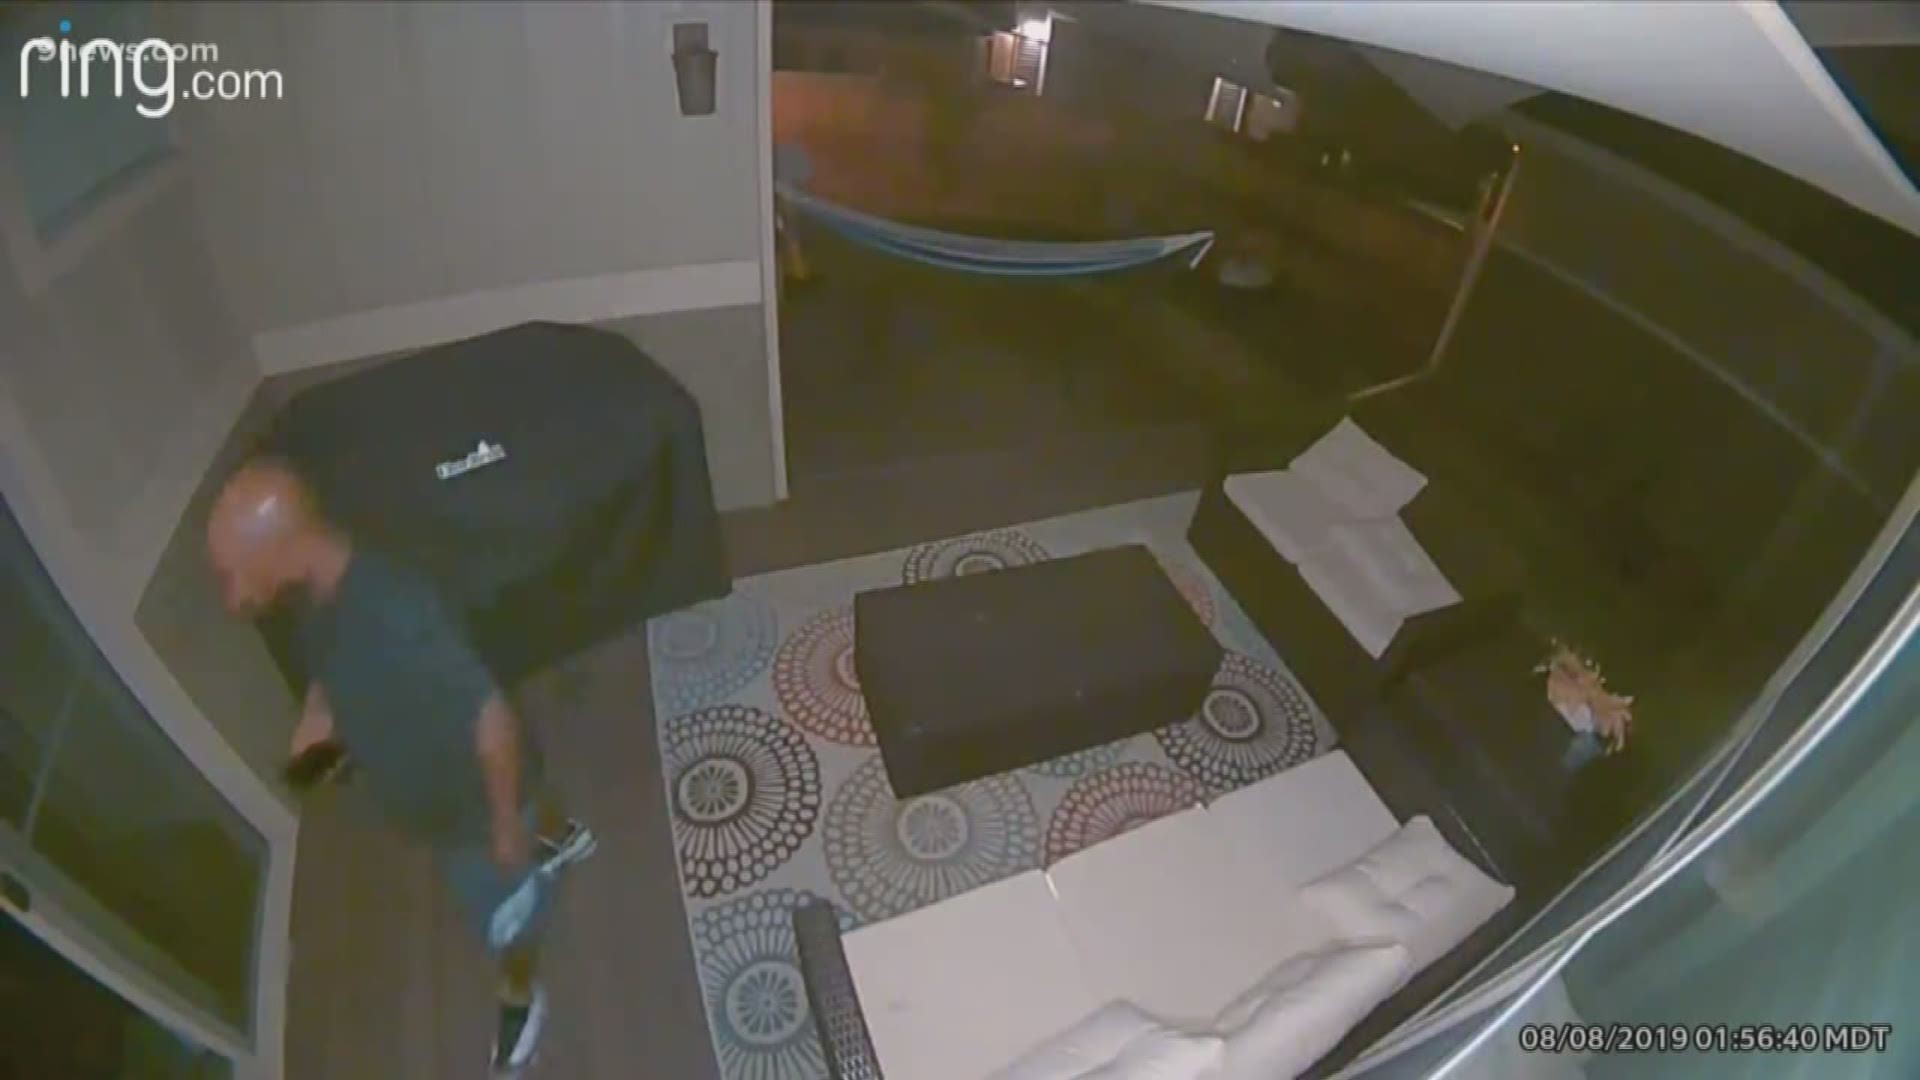 Surveillance video of the suspected burglar has been passed around by neighbors on social media.